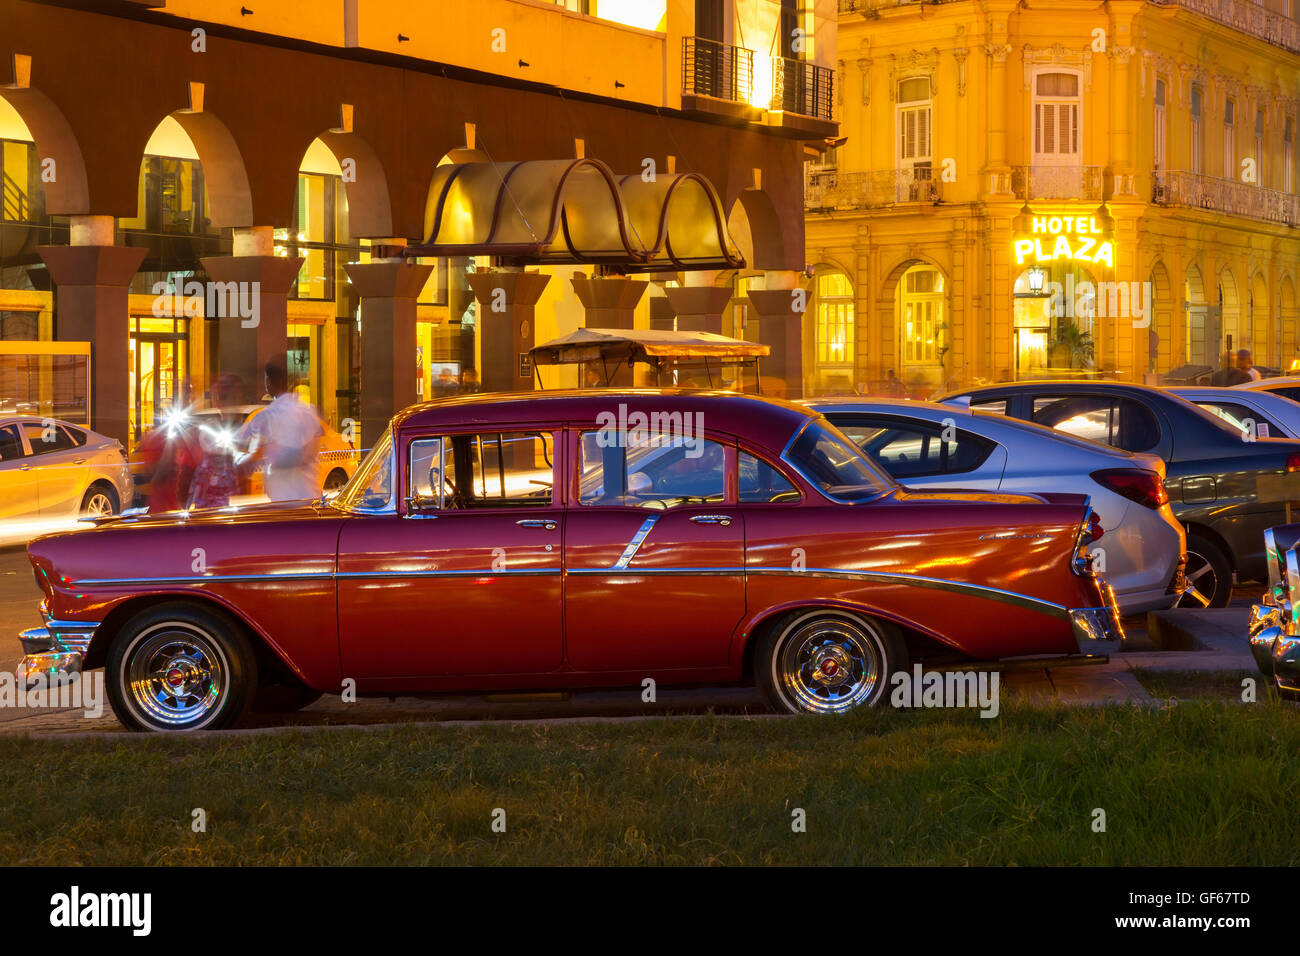 A classic American car with Hotel Plaza in the background at night in Old Havana at dusk.  Havana, Cuba. Stock Photo